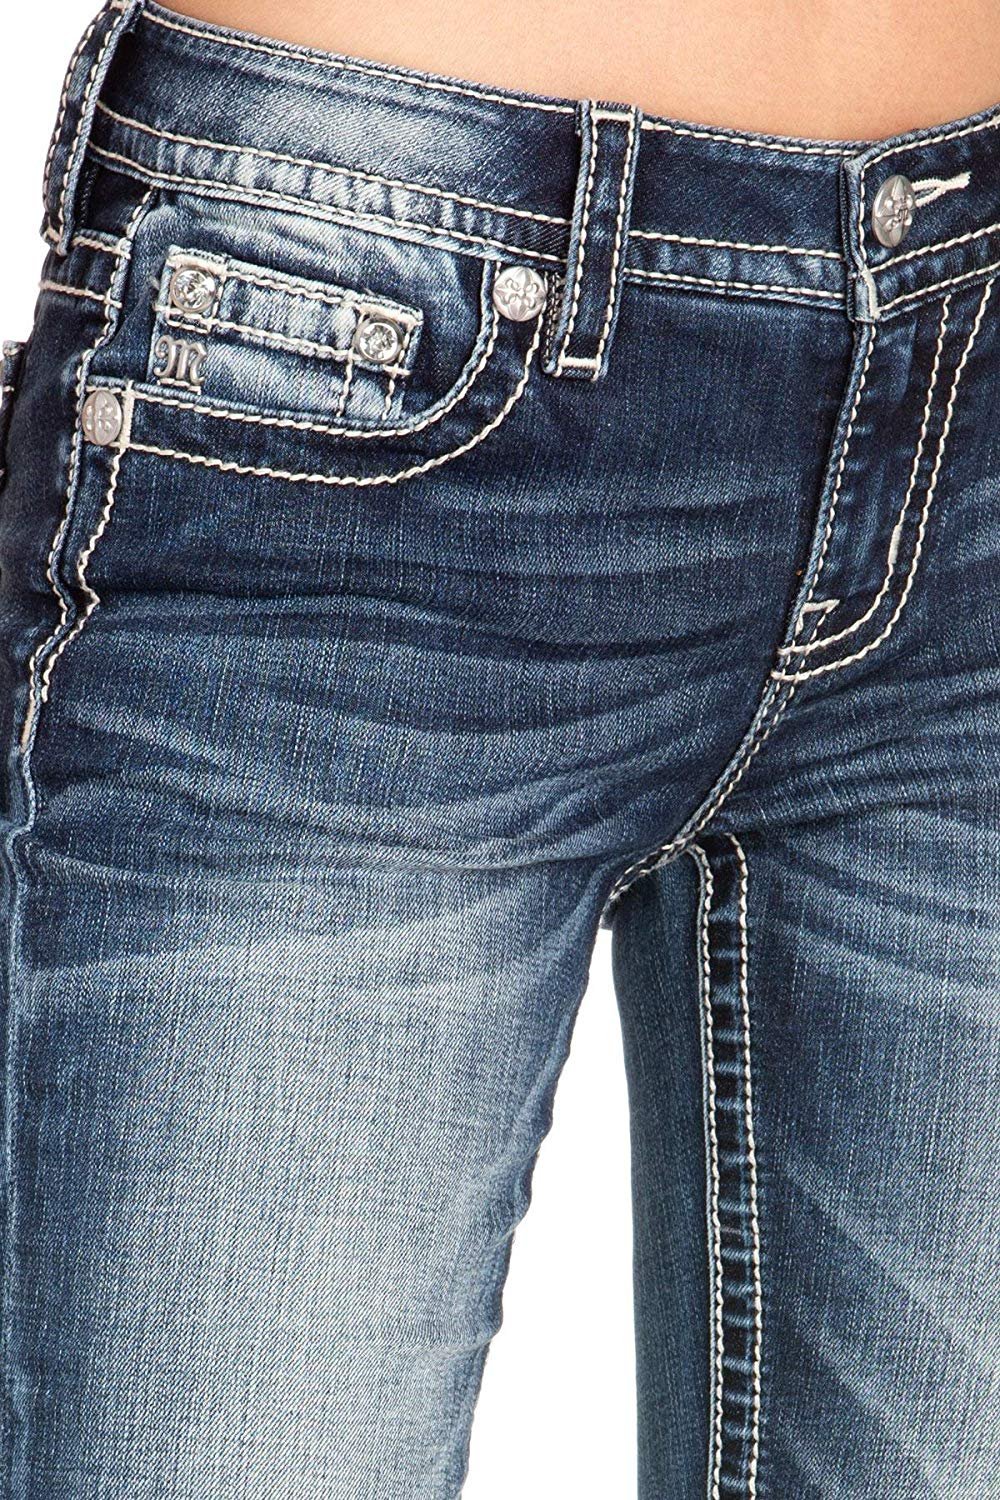 Crossing Paths Bootcut Jeans